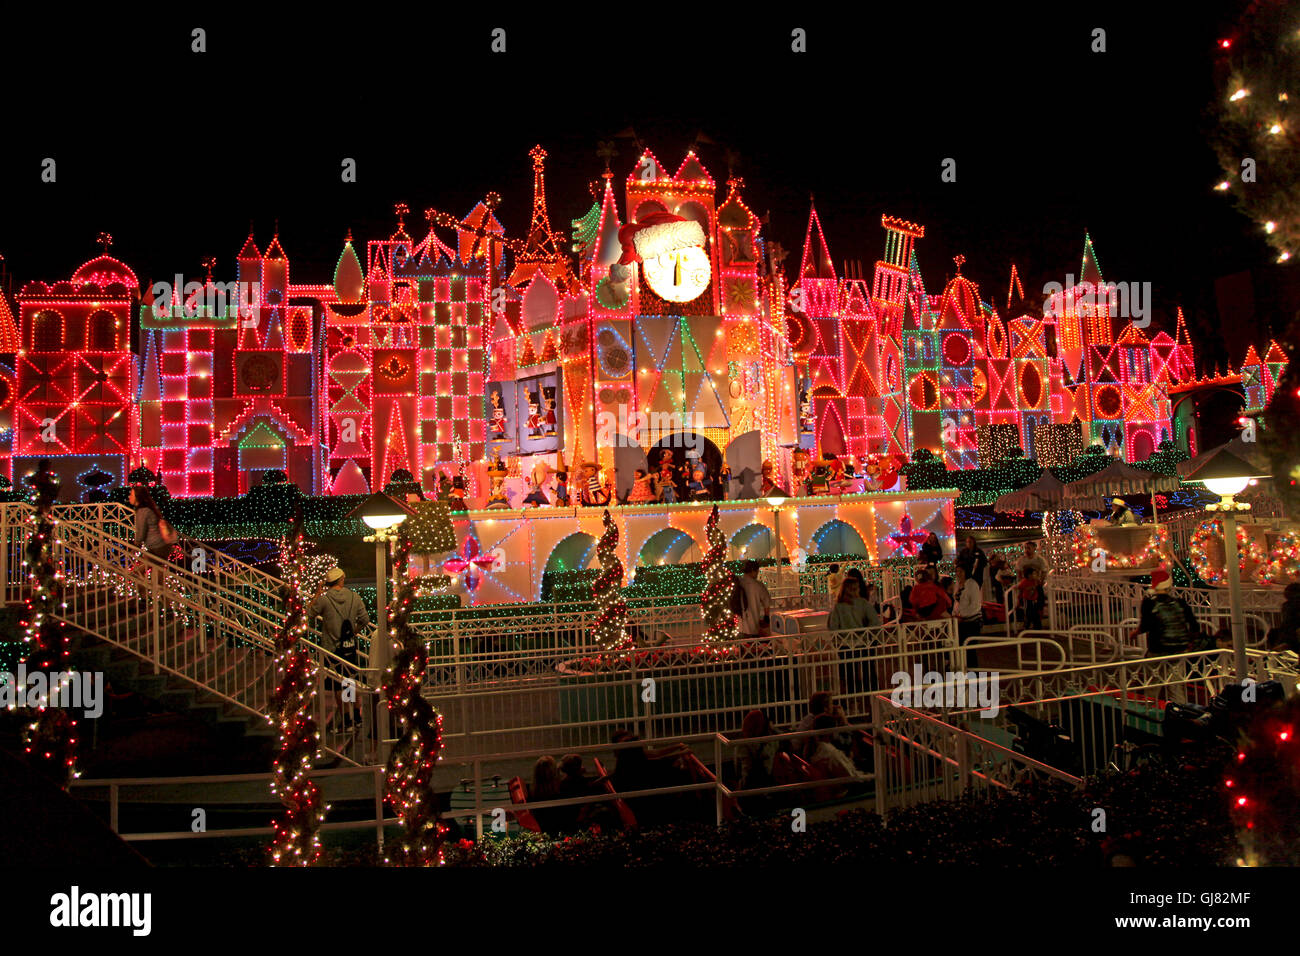 Anaheim, California, USA. November 16th, 2011. The exterior lights and decorations of It's a Small World Holiday. Stock Photo